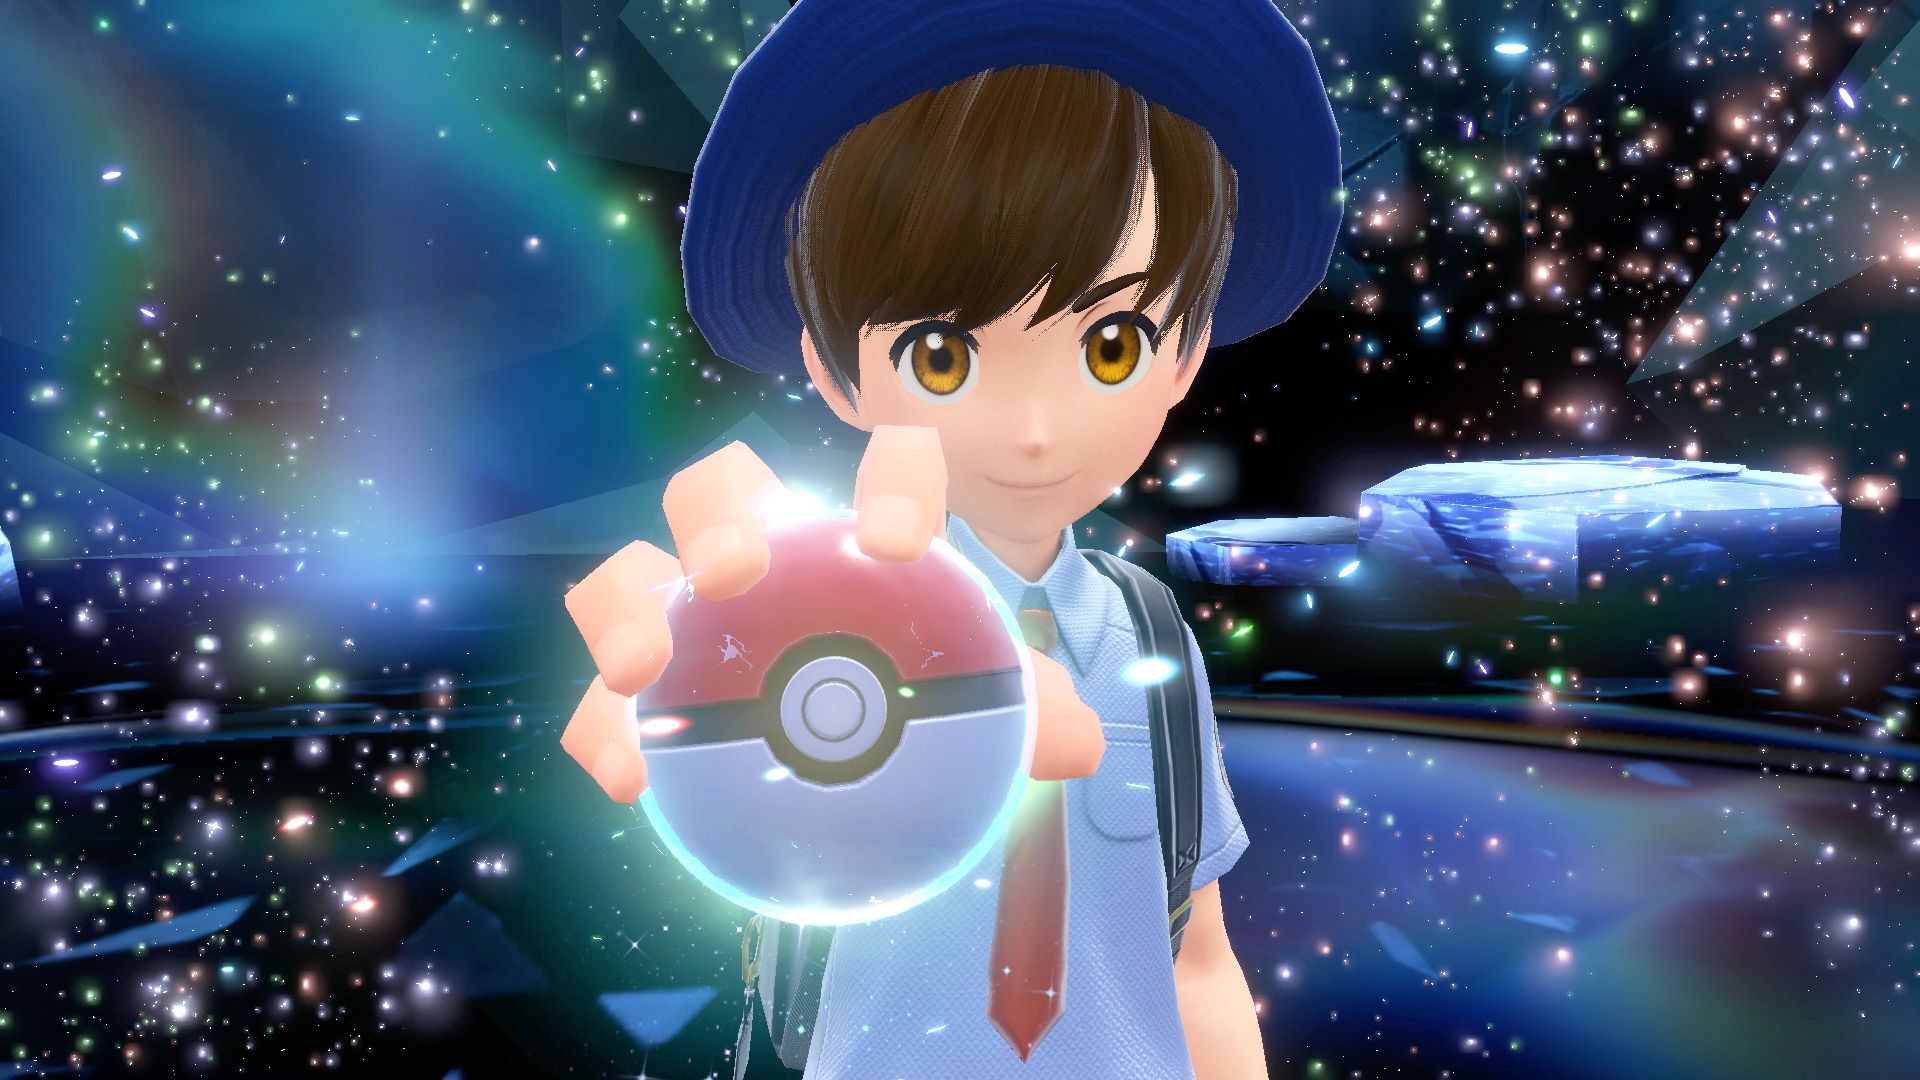 Pokémon Scarlet and Violet Pokémon trainer holds the glowing Poke ball to the camera